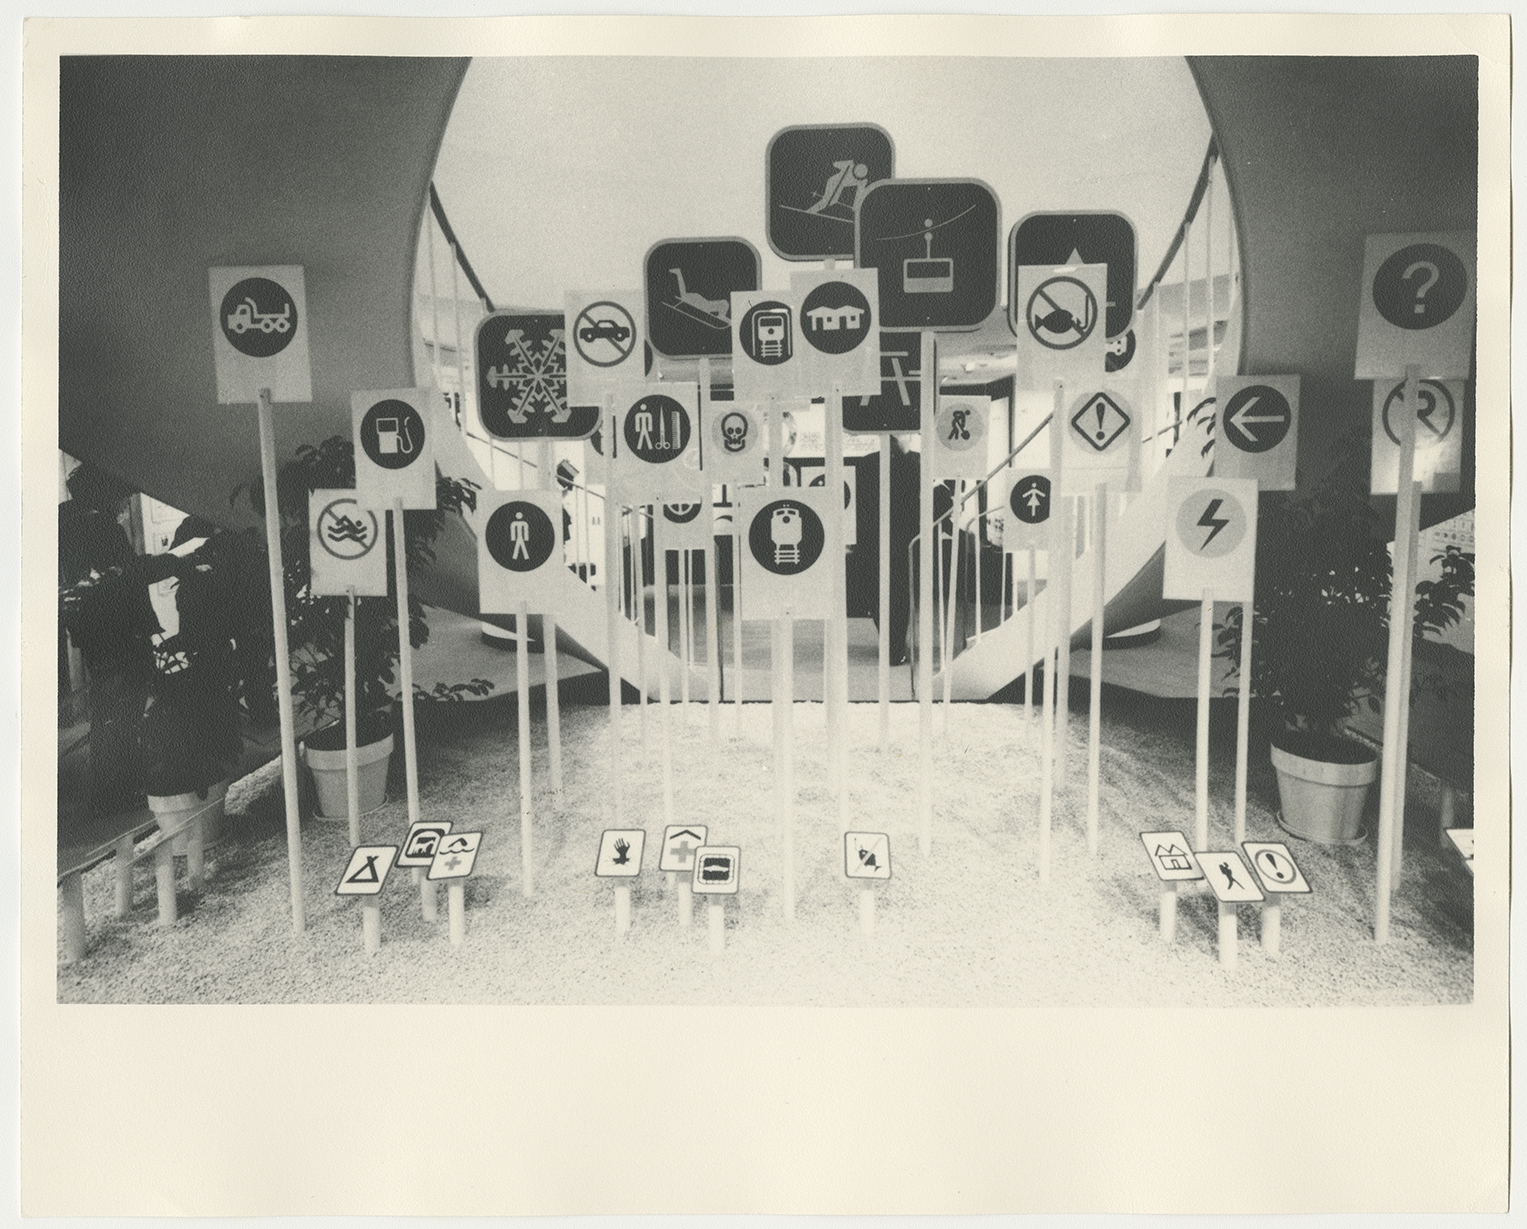 Black-and-white photograph of an exhibition featuring sticks holding up large cards depicting various symbols for communication.